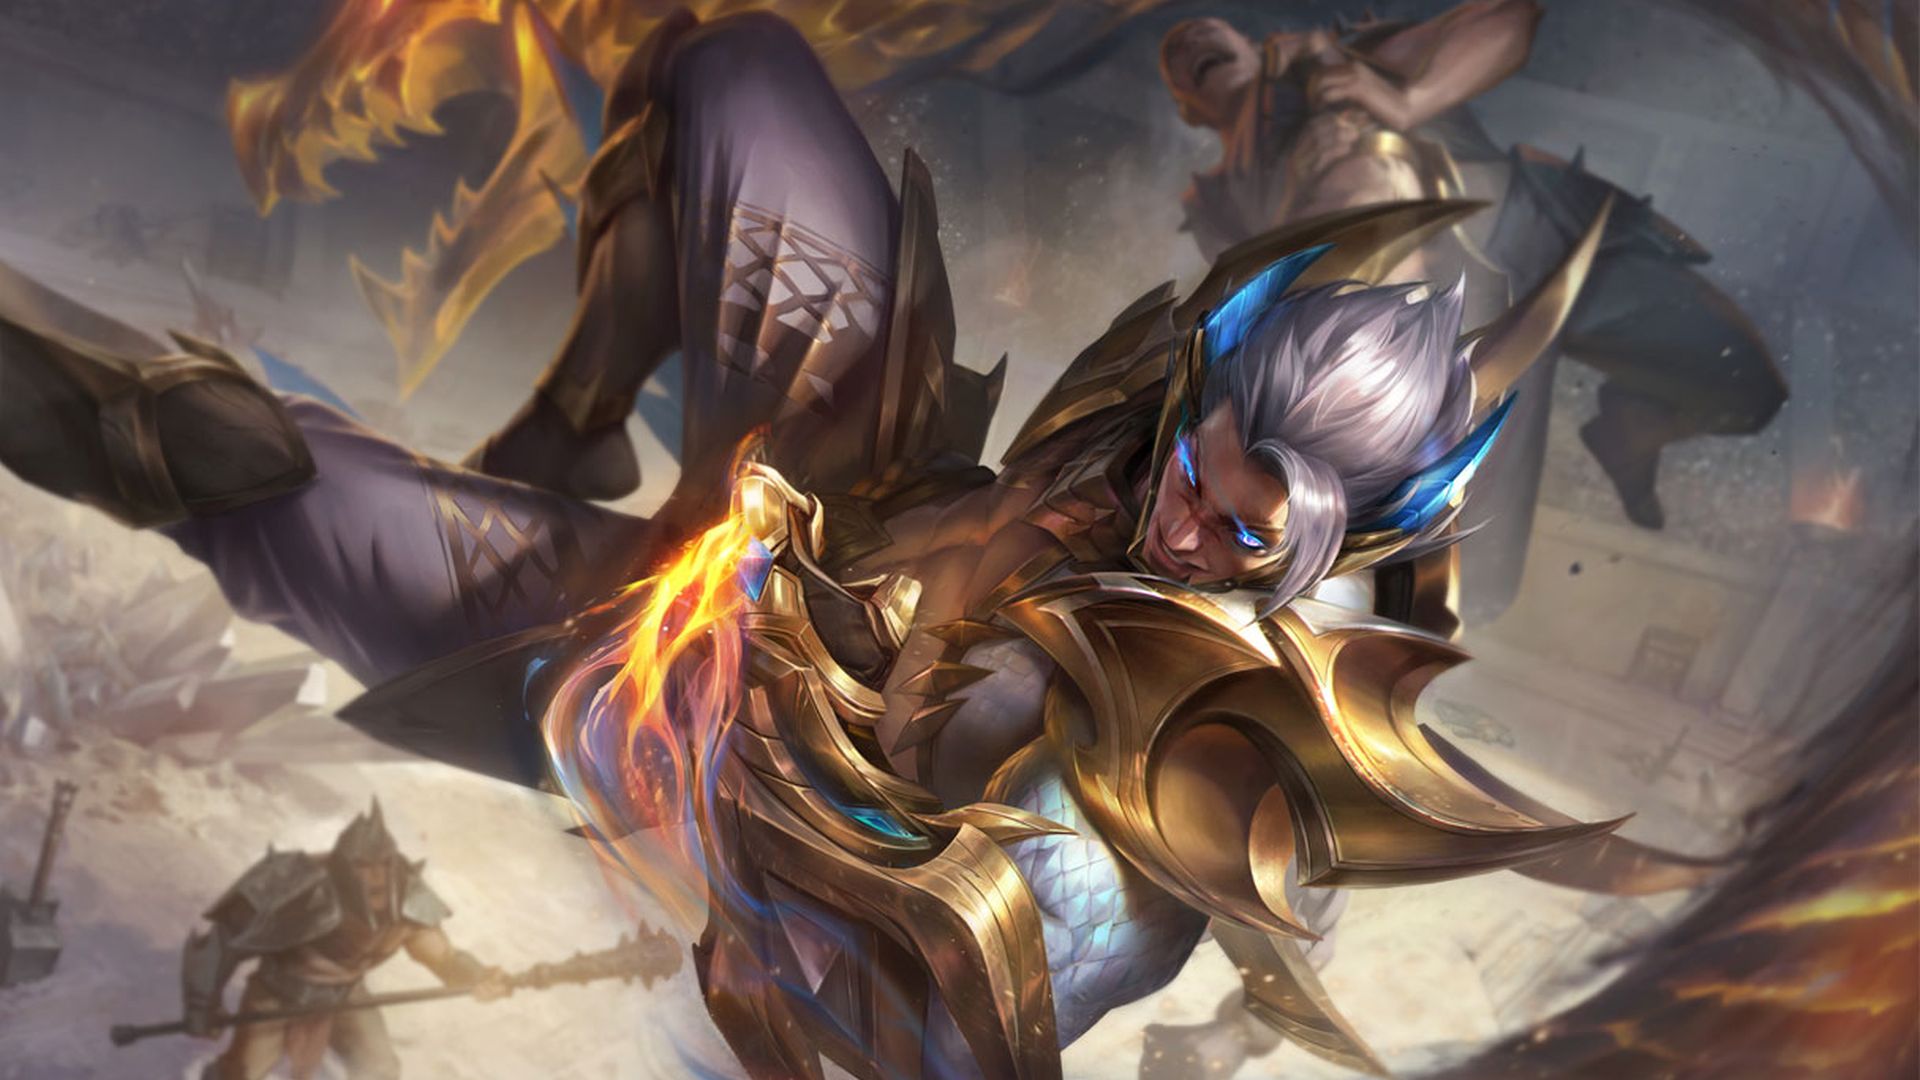 League of Legends roadmap teases “rising star” and “ironwilled